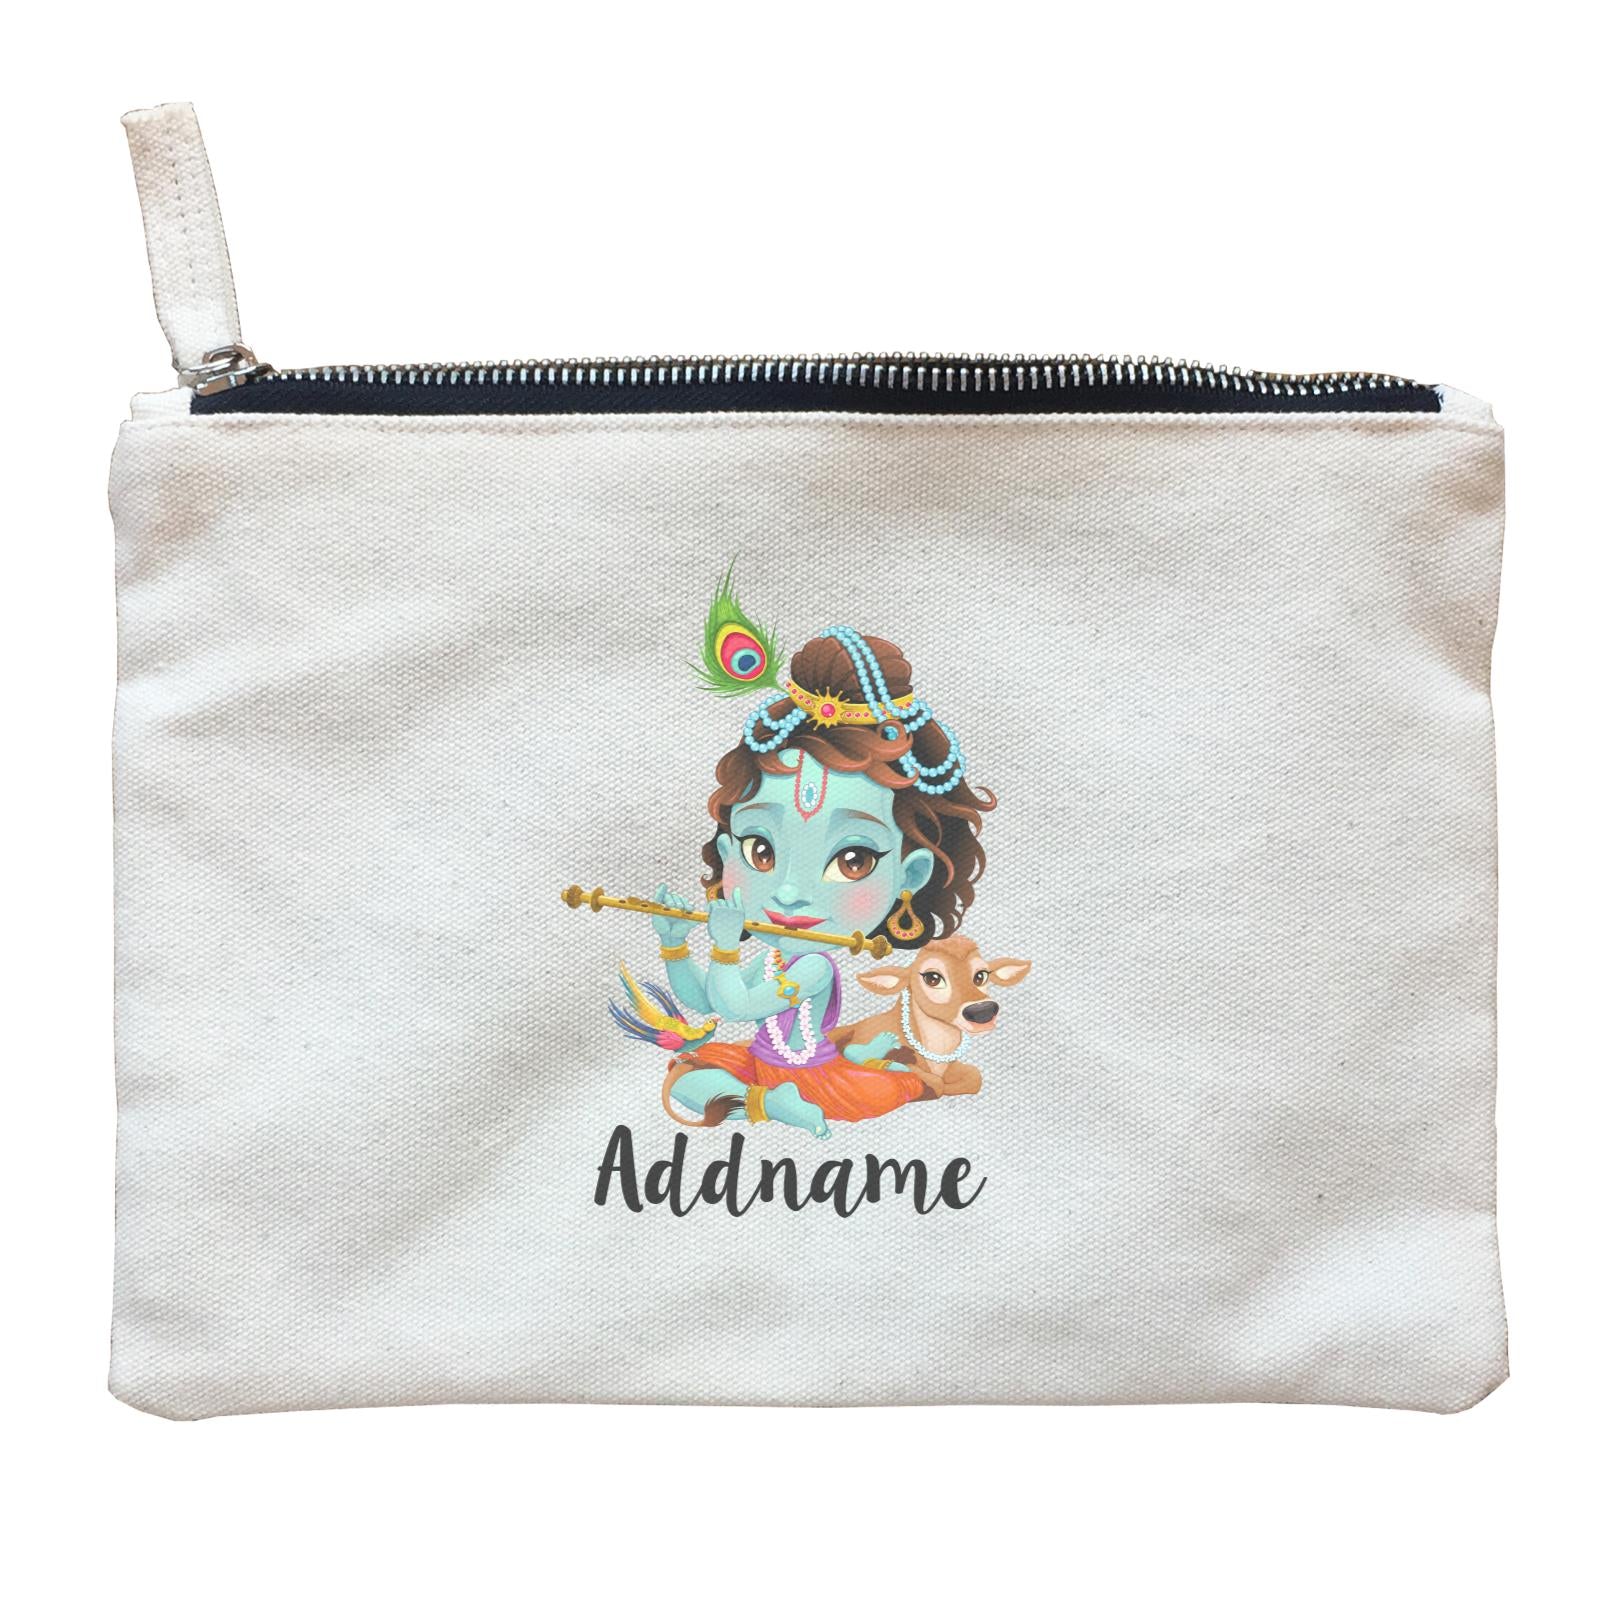 Artistic Krishna Playing Flute with Cow Addname Zipper Pouch